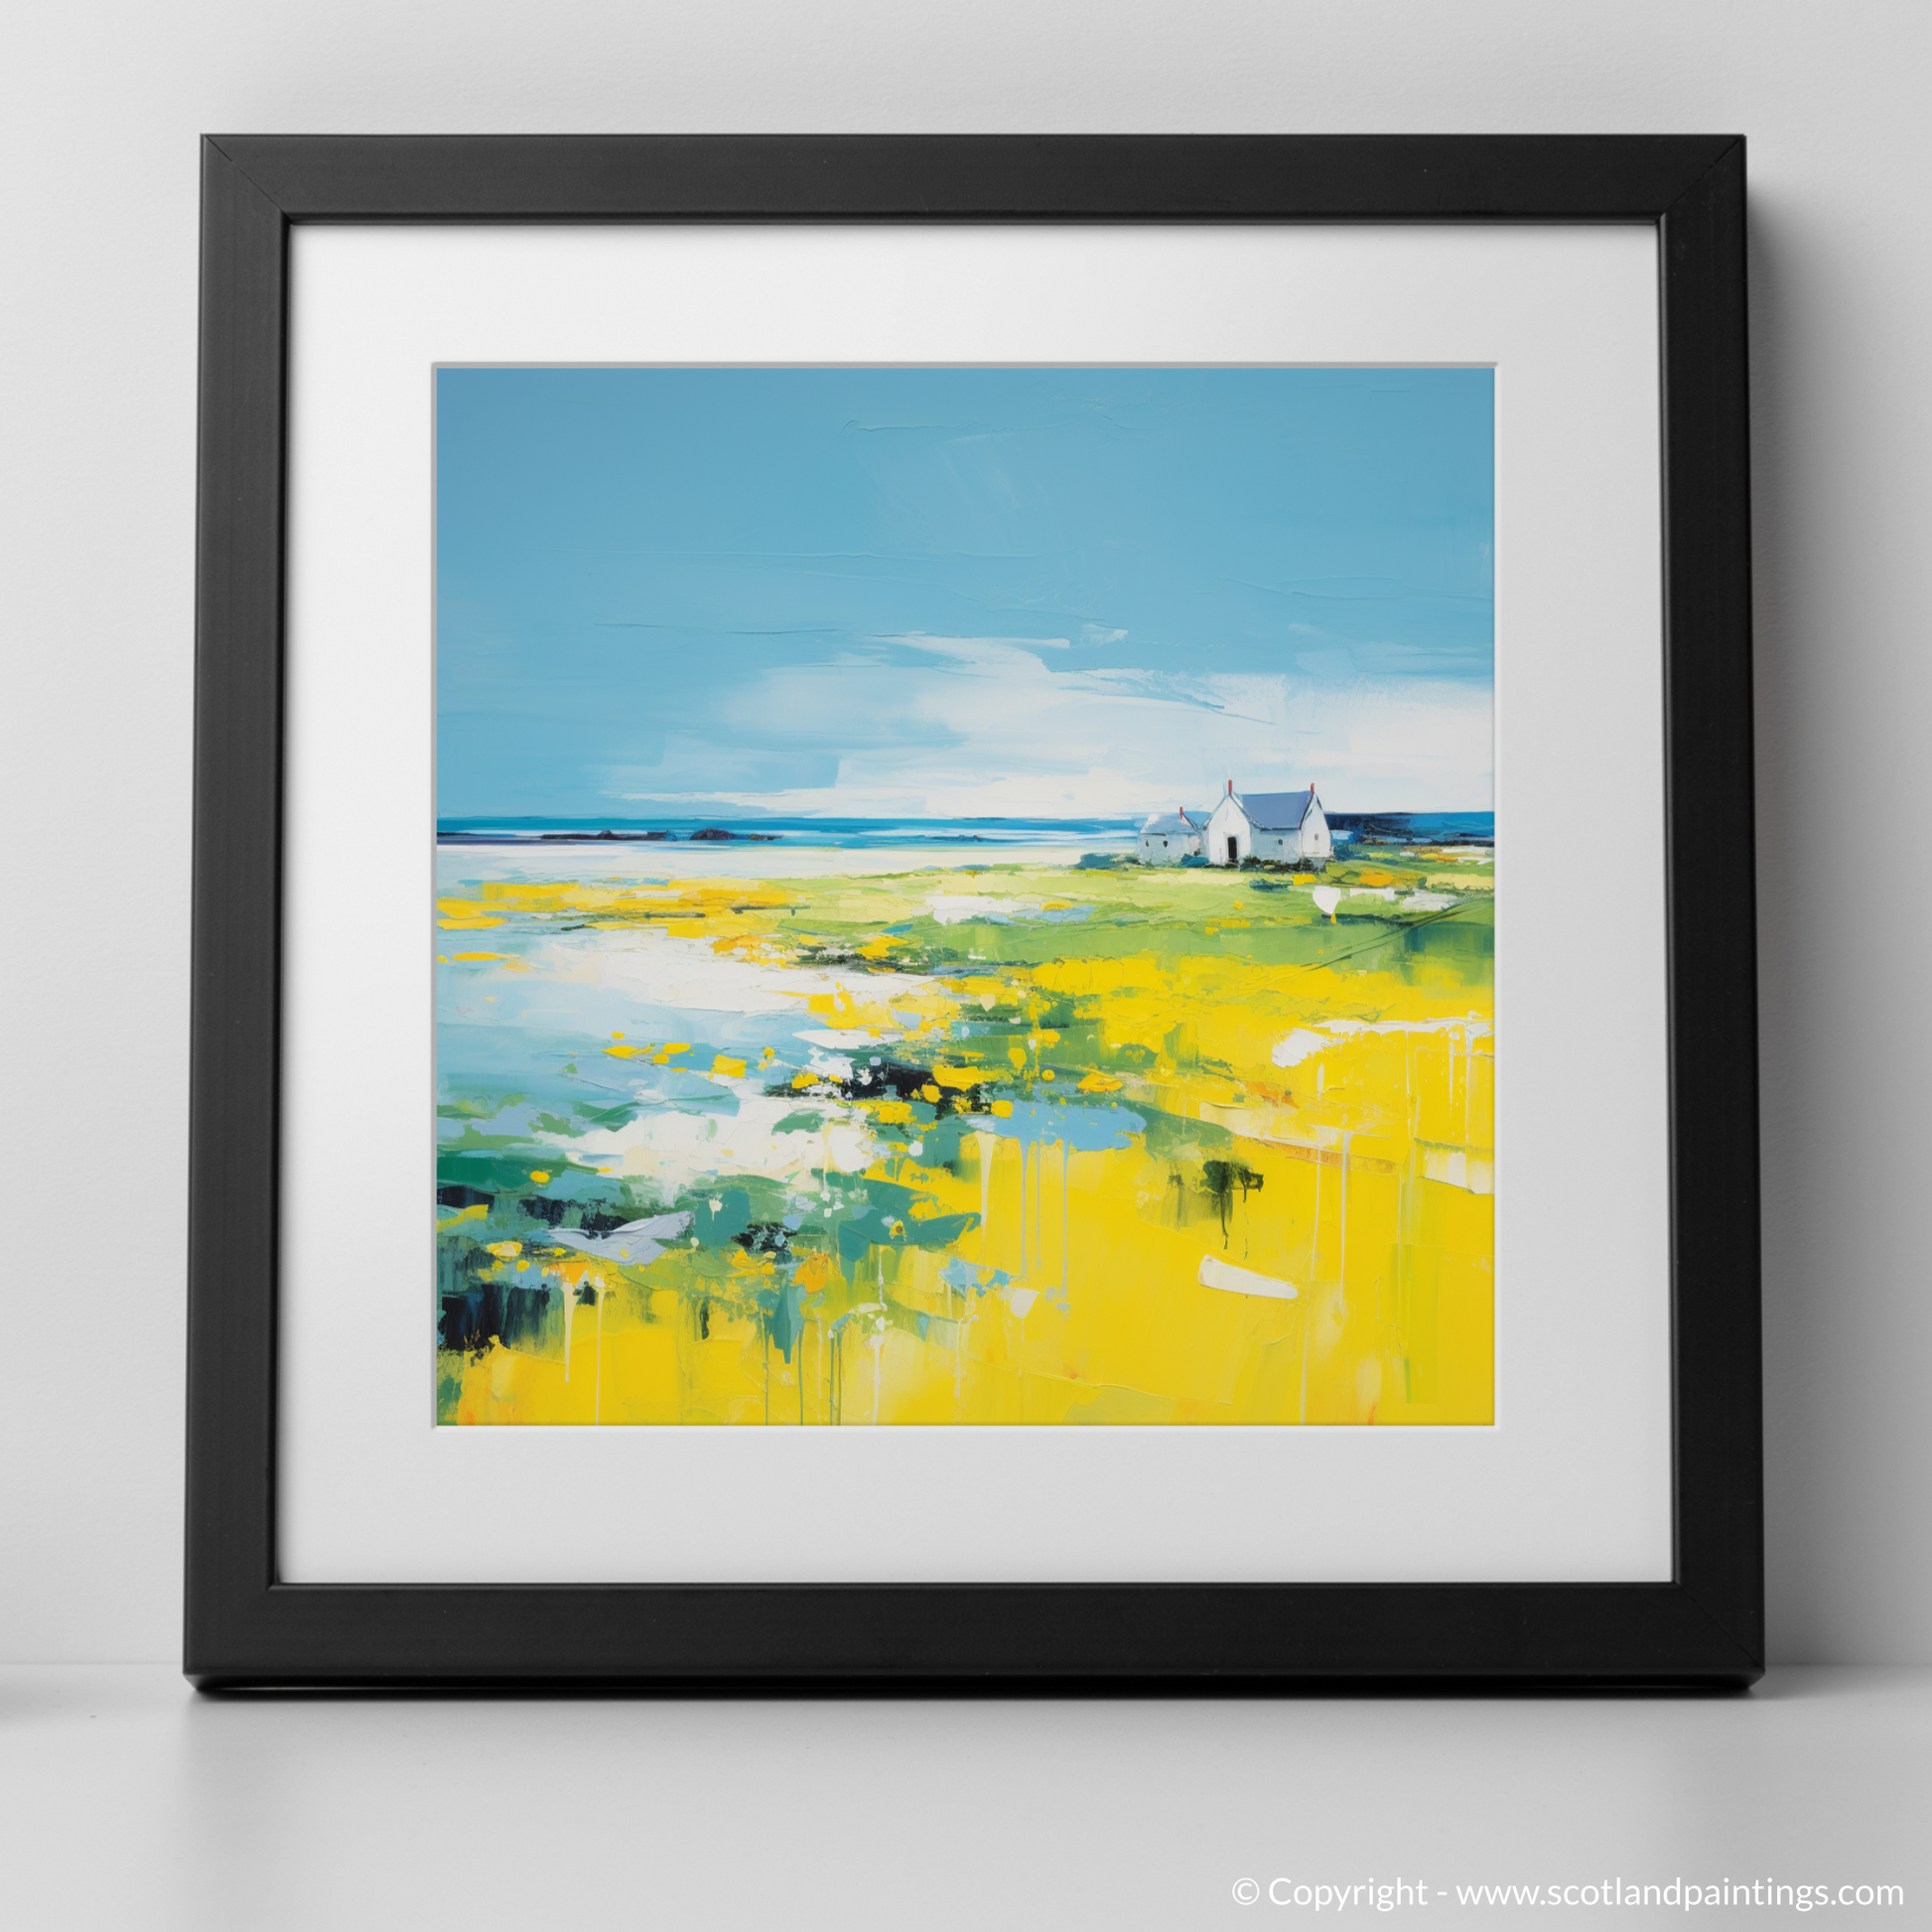 Art Print of Isle of Tiree, Inner Hebrides in summer with a black frame